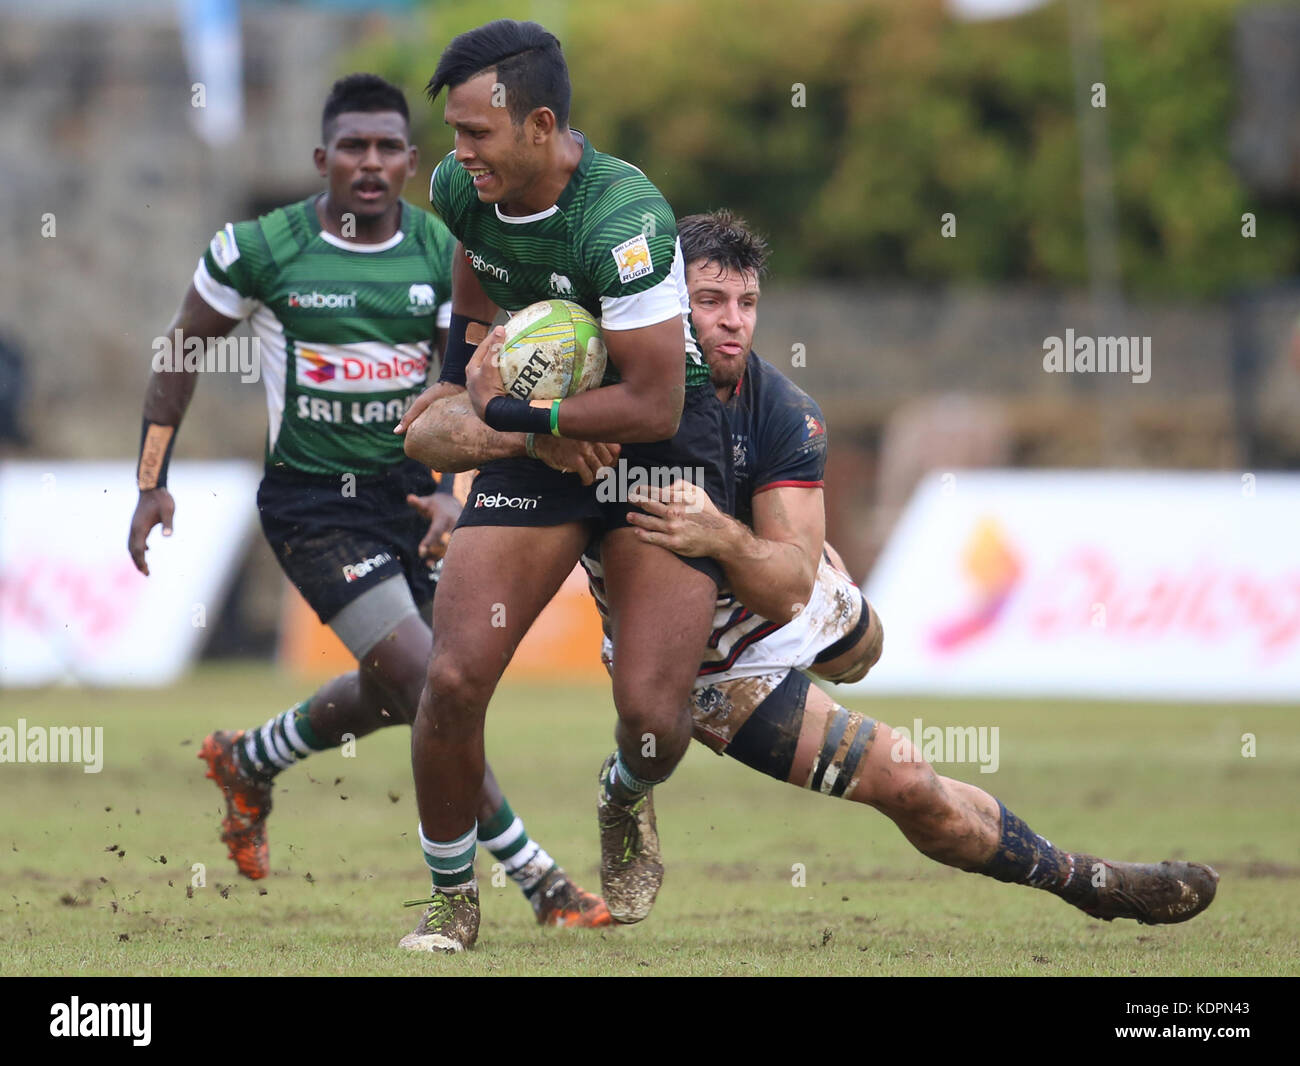 Colombo, Sri Lanka. 15th Oct, 2017. Player of Sri Lanka is tackled by Player of  Hong Kong  during the Asia Rugby Men's Sevens 2017 match between Sri Lanka and Hong Kong at Race Course Ground on 15 October 2017 in Colombo, Sri Lanka.  Credit: Lahiru Harshana/Alamy Live News Credit: Lahiru Harshana/Alamy Live News Stock Photo